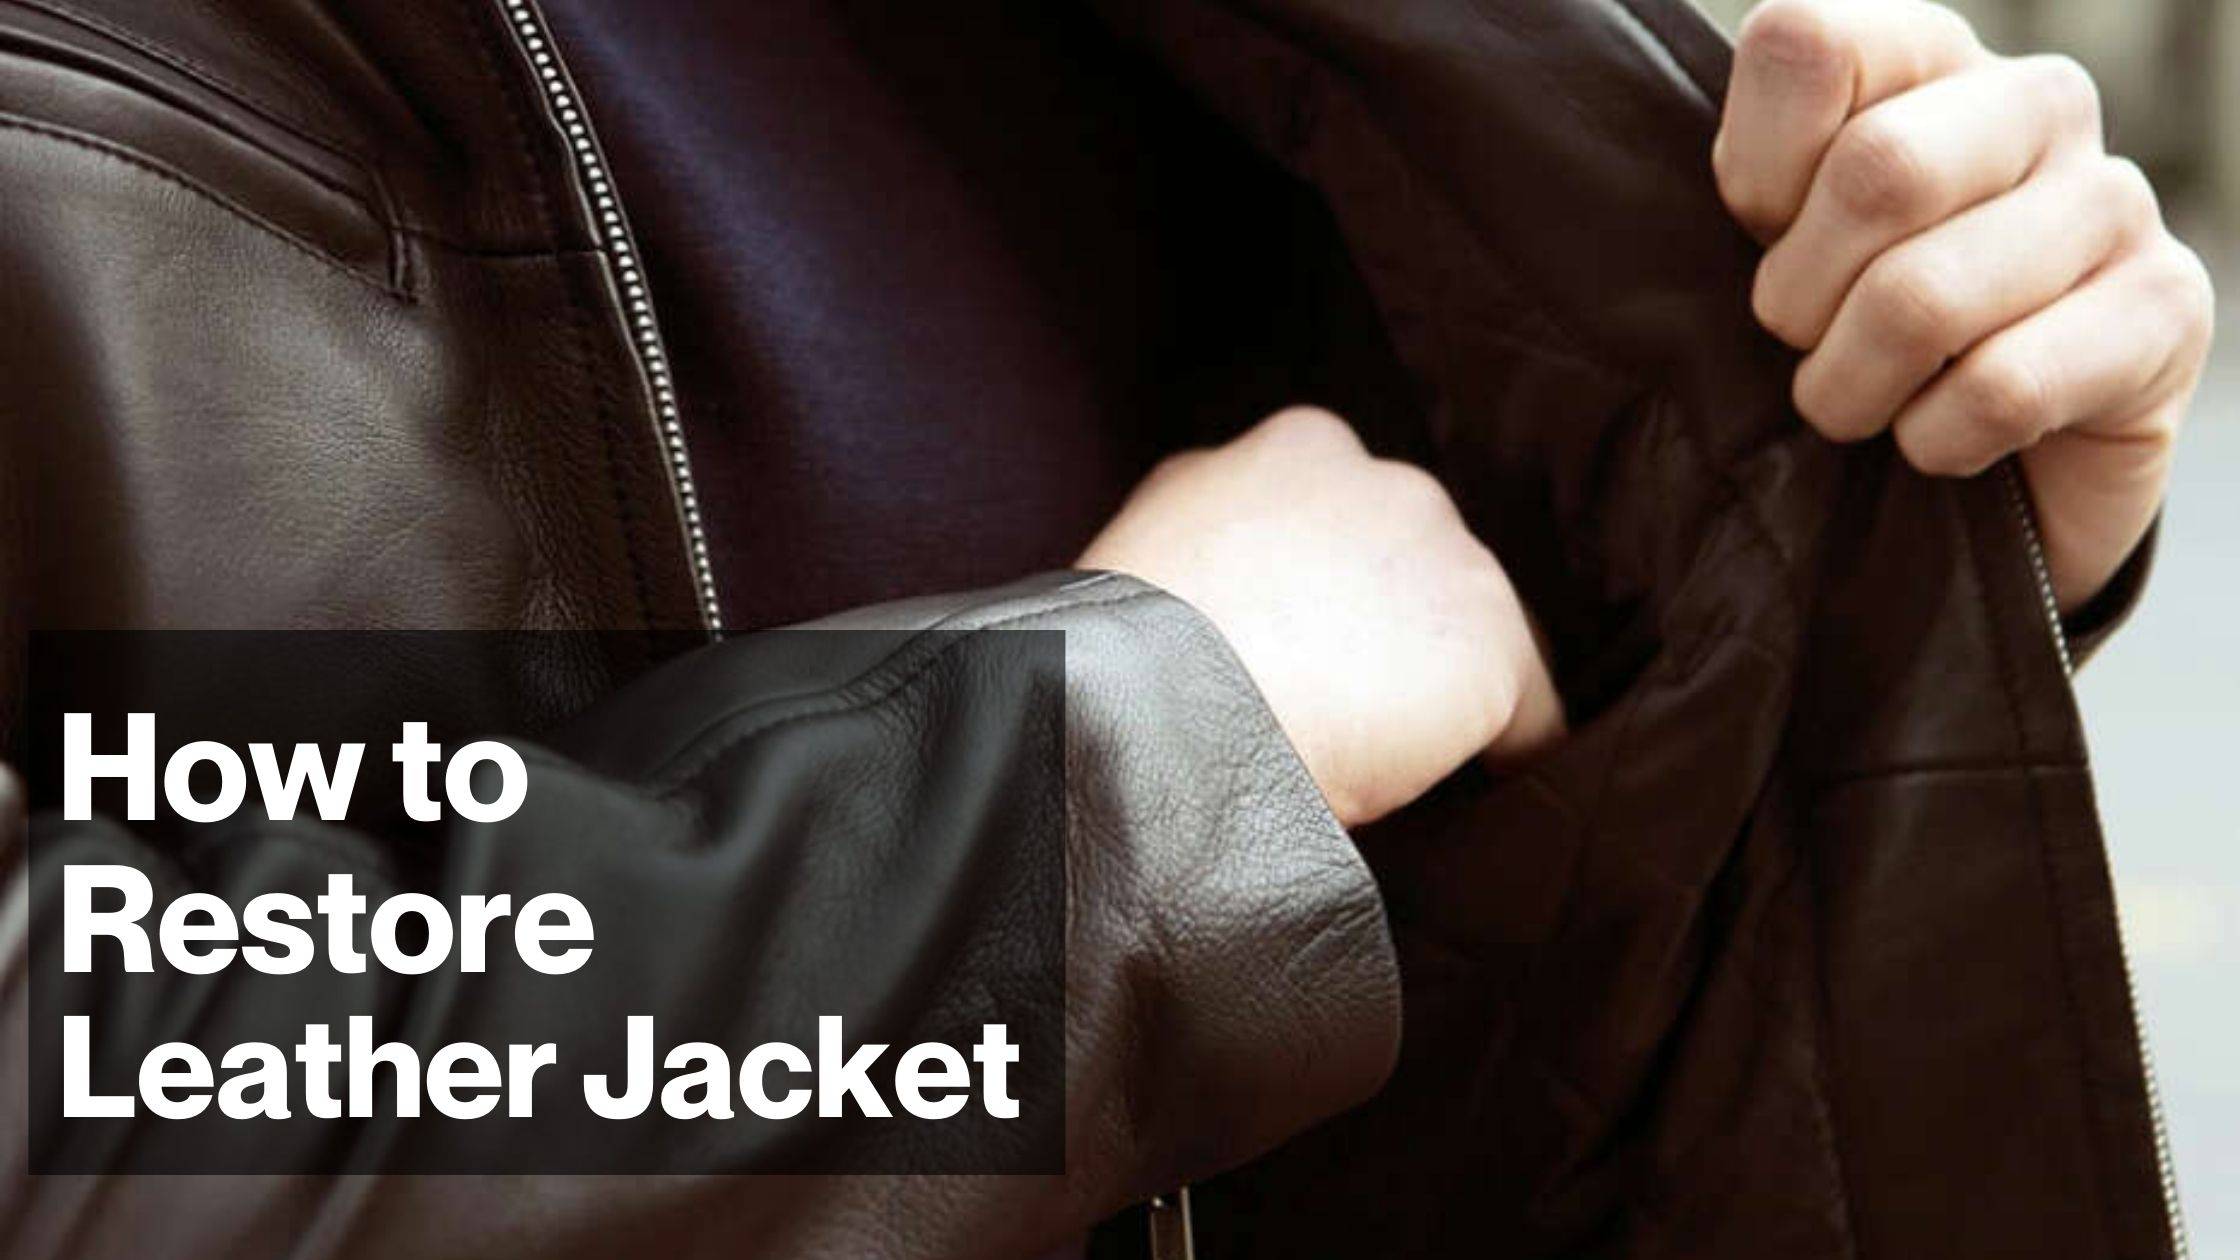 How to Restore Leather Jacket